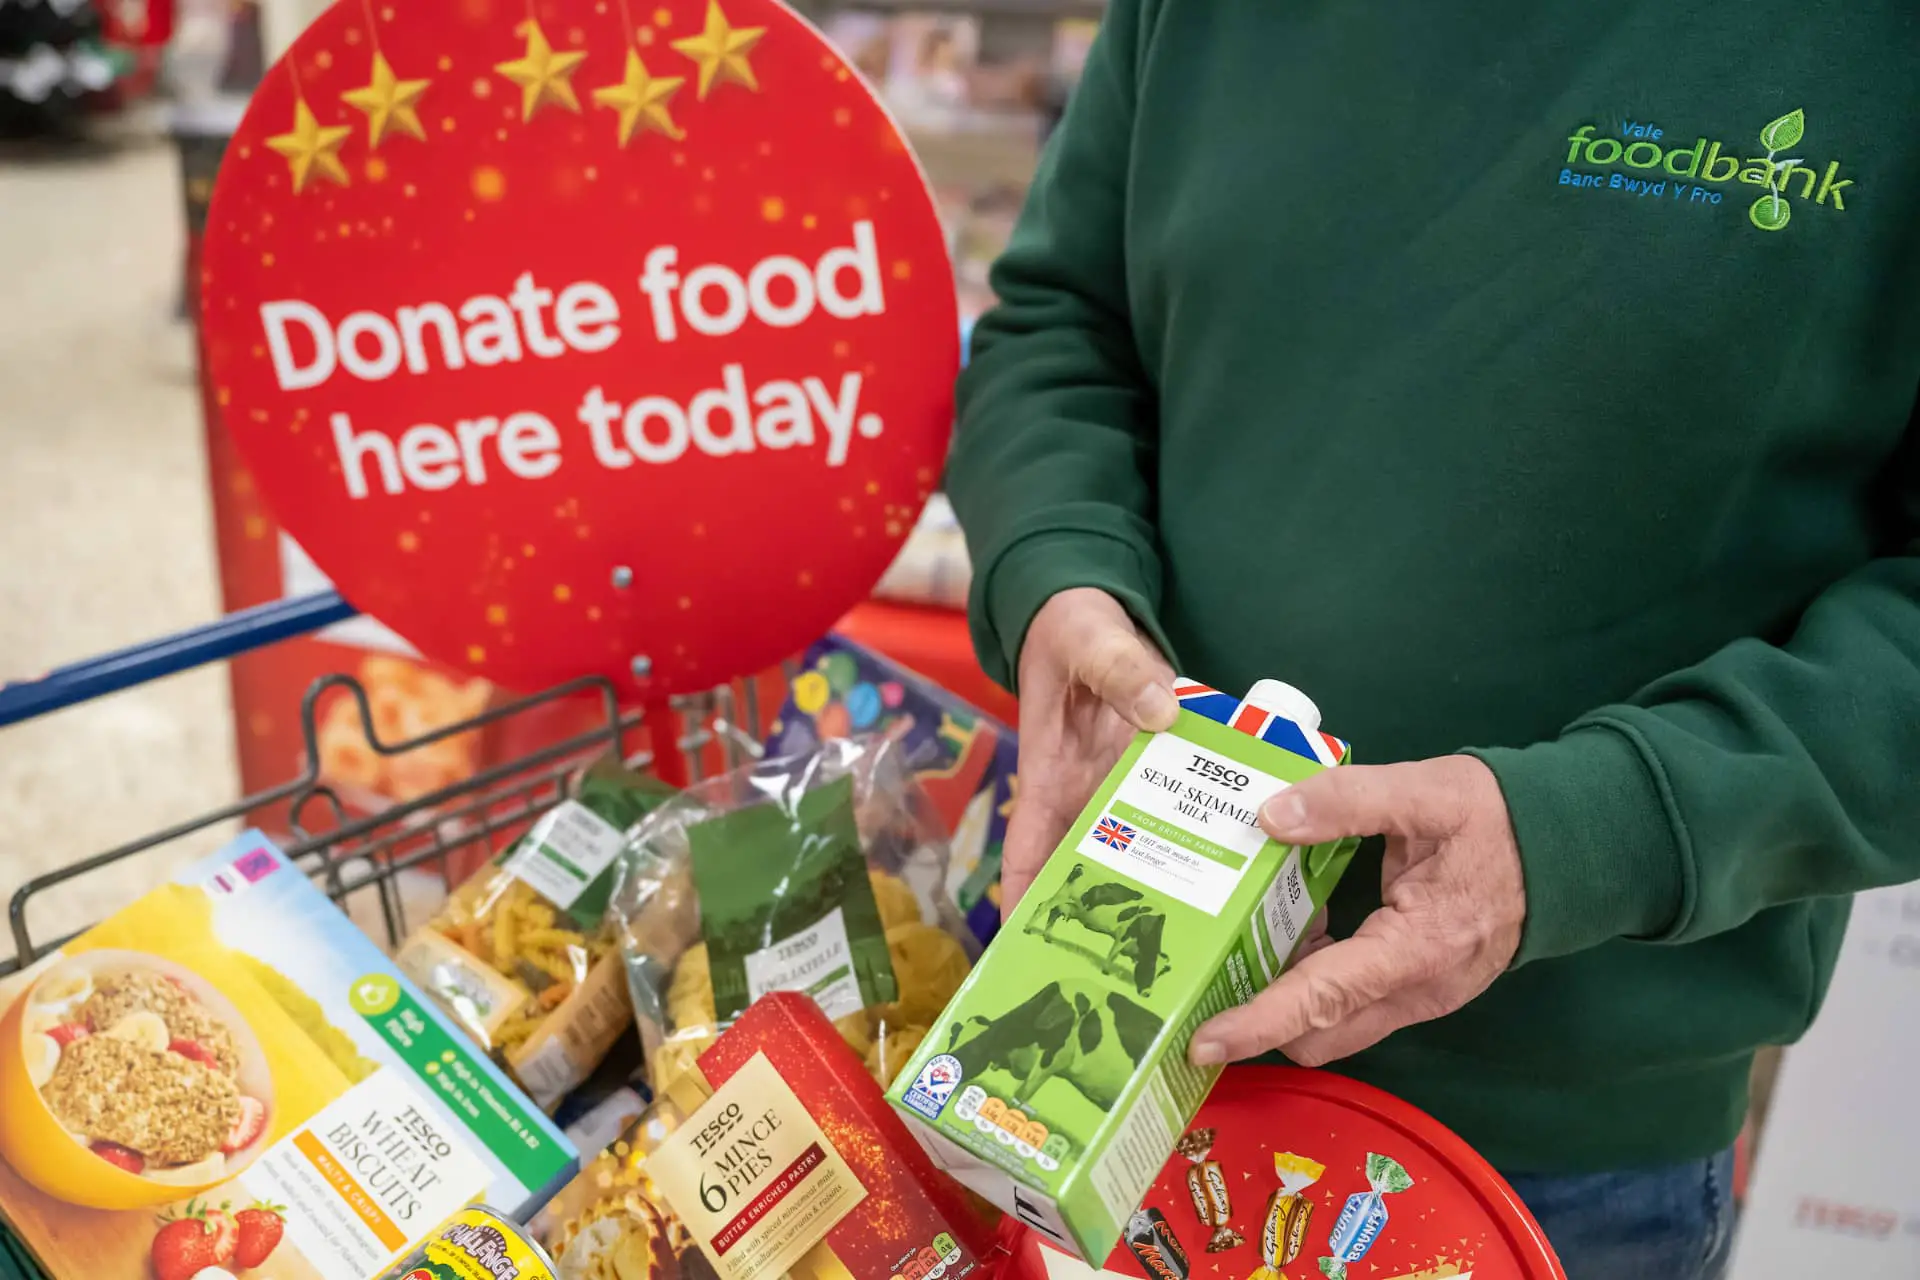 Food collection at Tesco for Foodbank